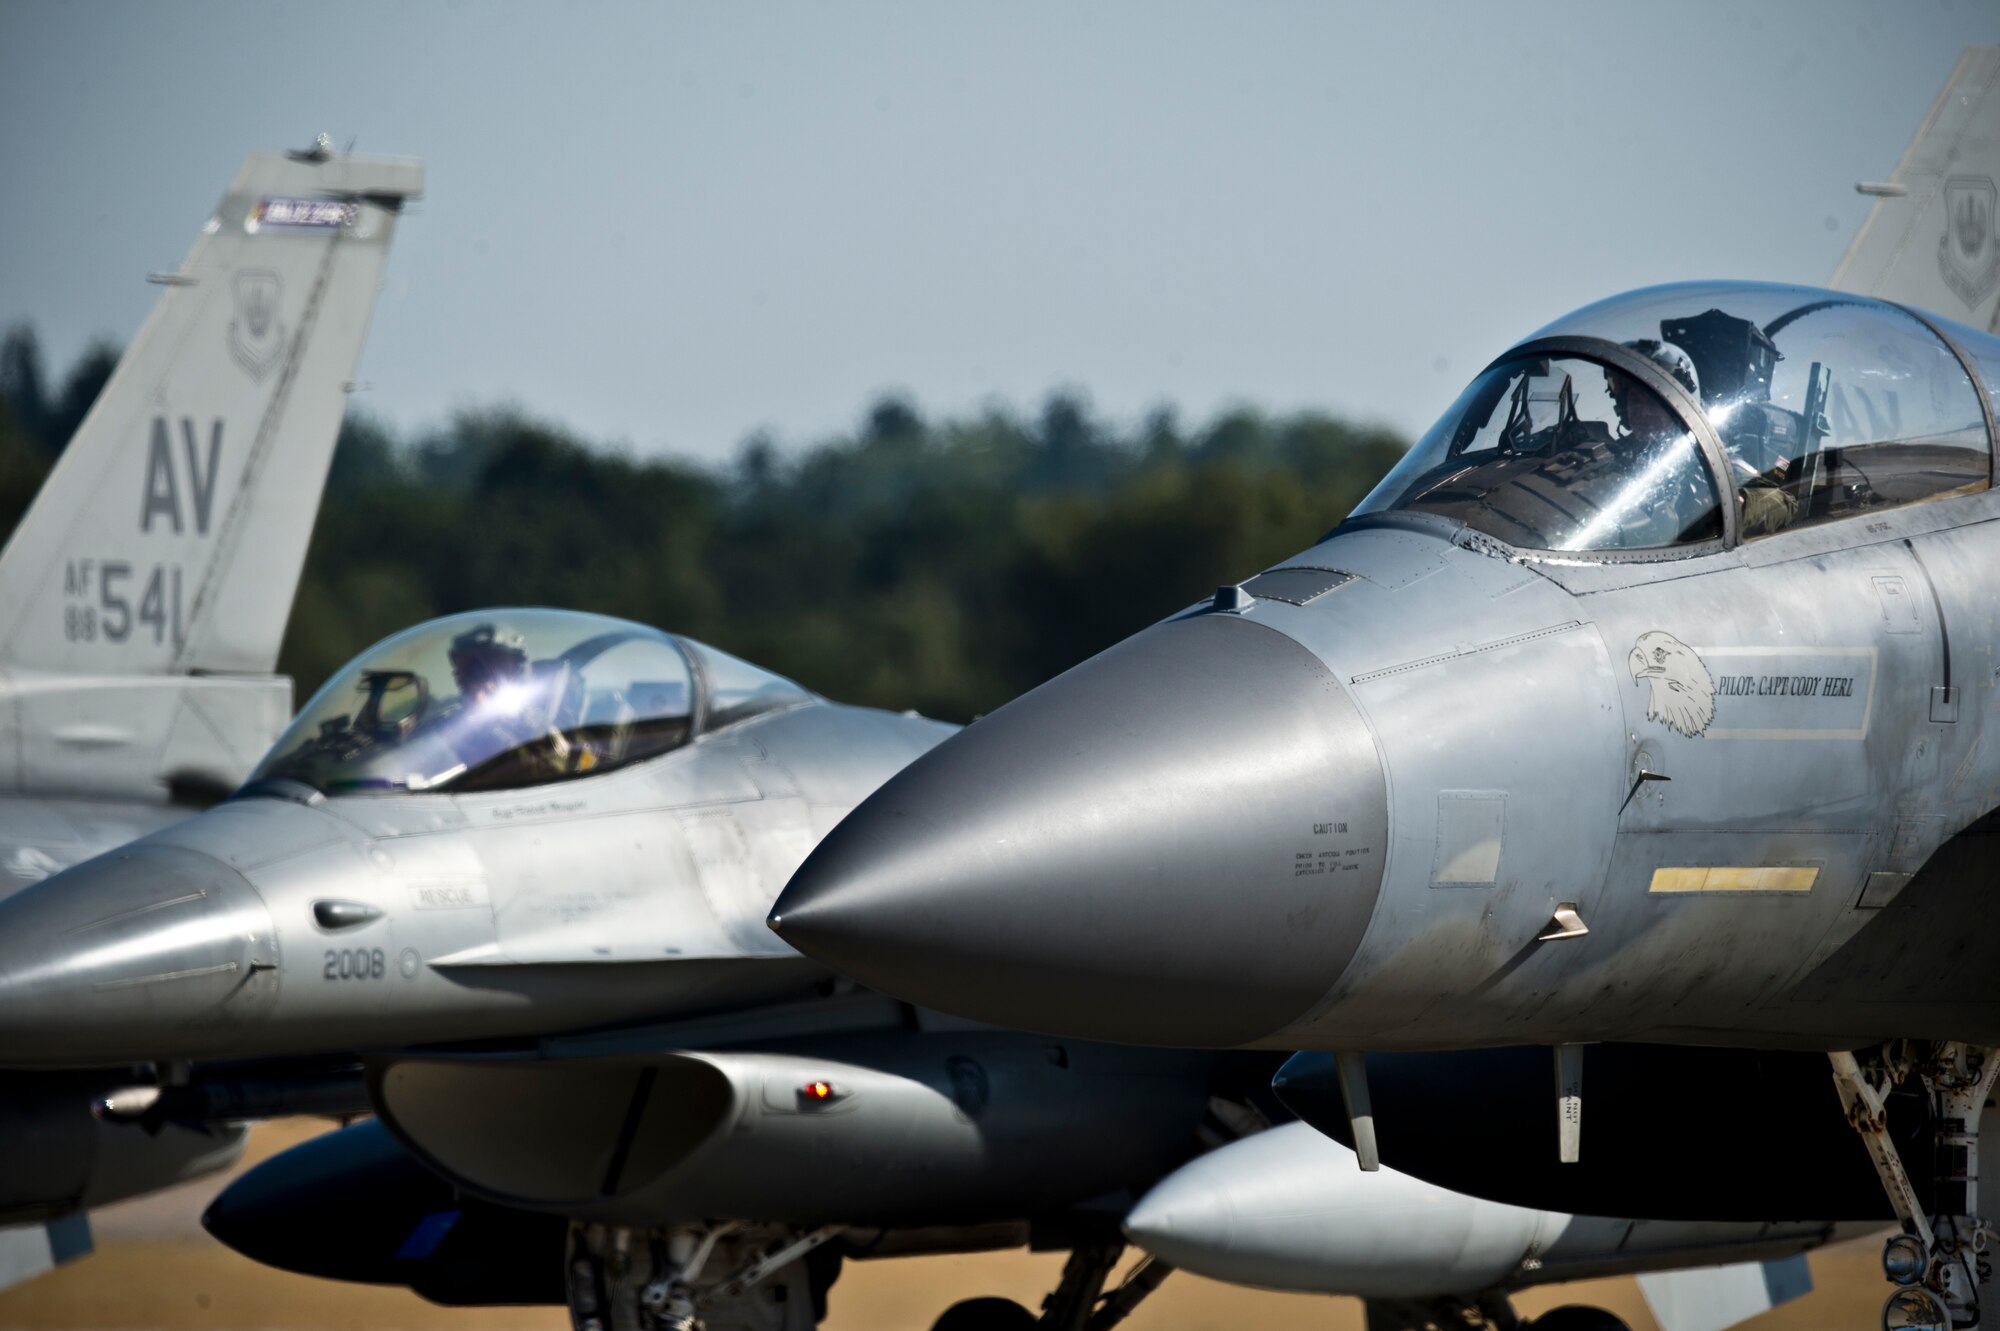 An F-15C Eagle from the 48th Fighter Wing's 493rd Fighter Squadron, and F-16C Fighting Falcons from the 31st Fighter Wing's 510th Fighter Squadron prepare to take off for a training sortie at Royal Air Force Lakenheath, England, Aug. 3, 2018. During a two-week flying training deployment, 14 F-16C aircraft and approximately 200 Airmen from the 31st FW focused on maintaining joint readiness while building interoperability capabilities with NATO and other U.S. Air Force assets. (U.S. Air Force photo by Master Sgt. Eric Burks)